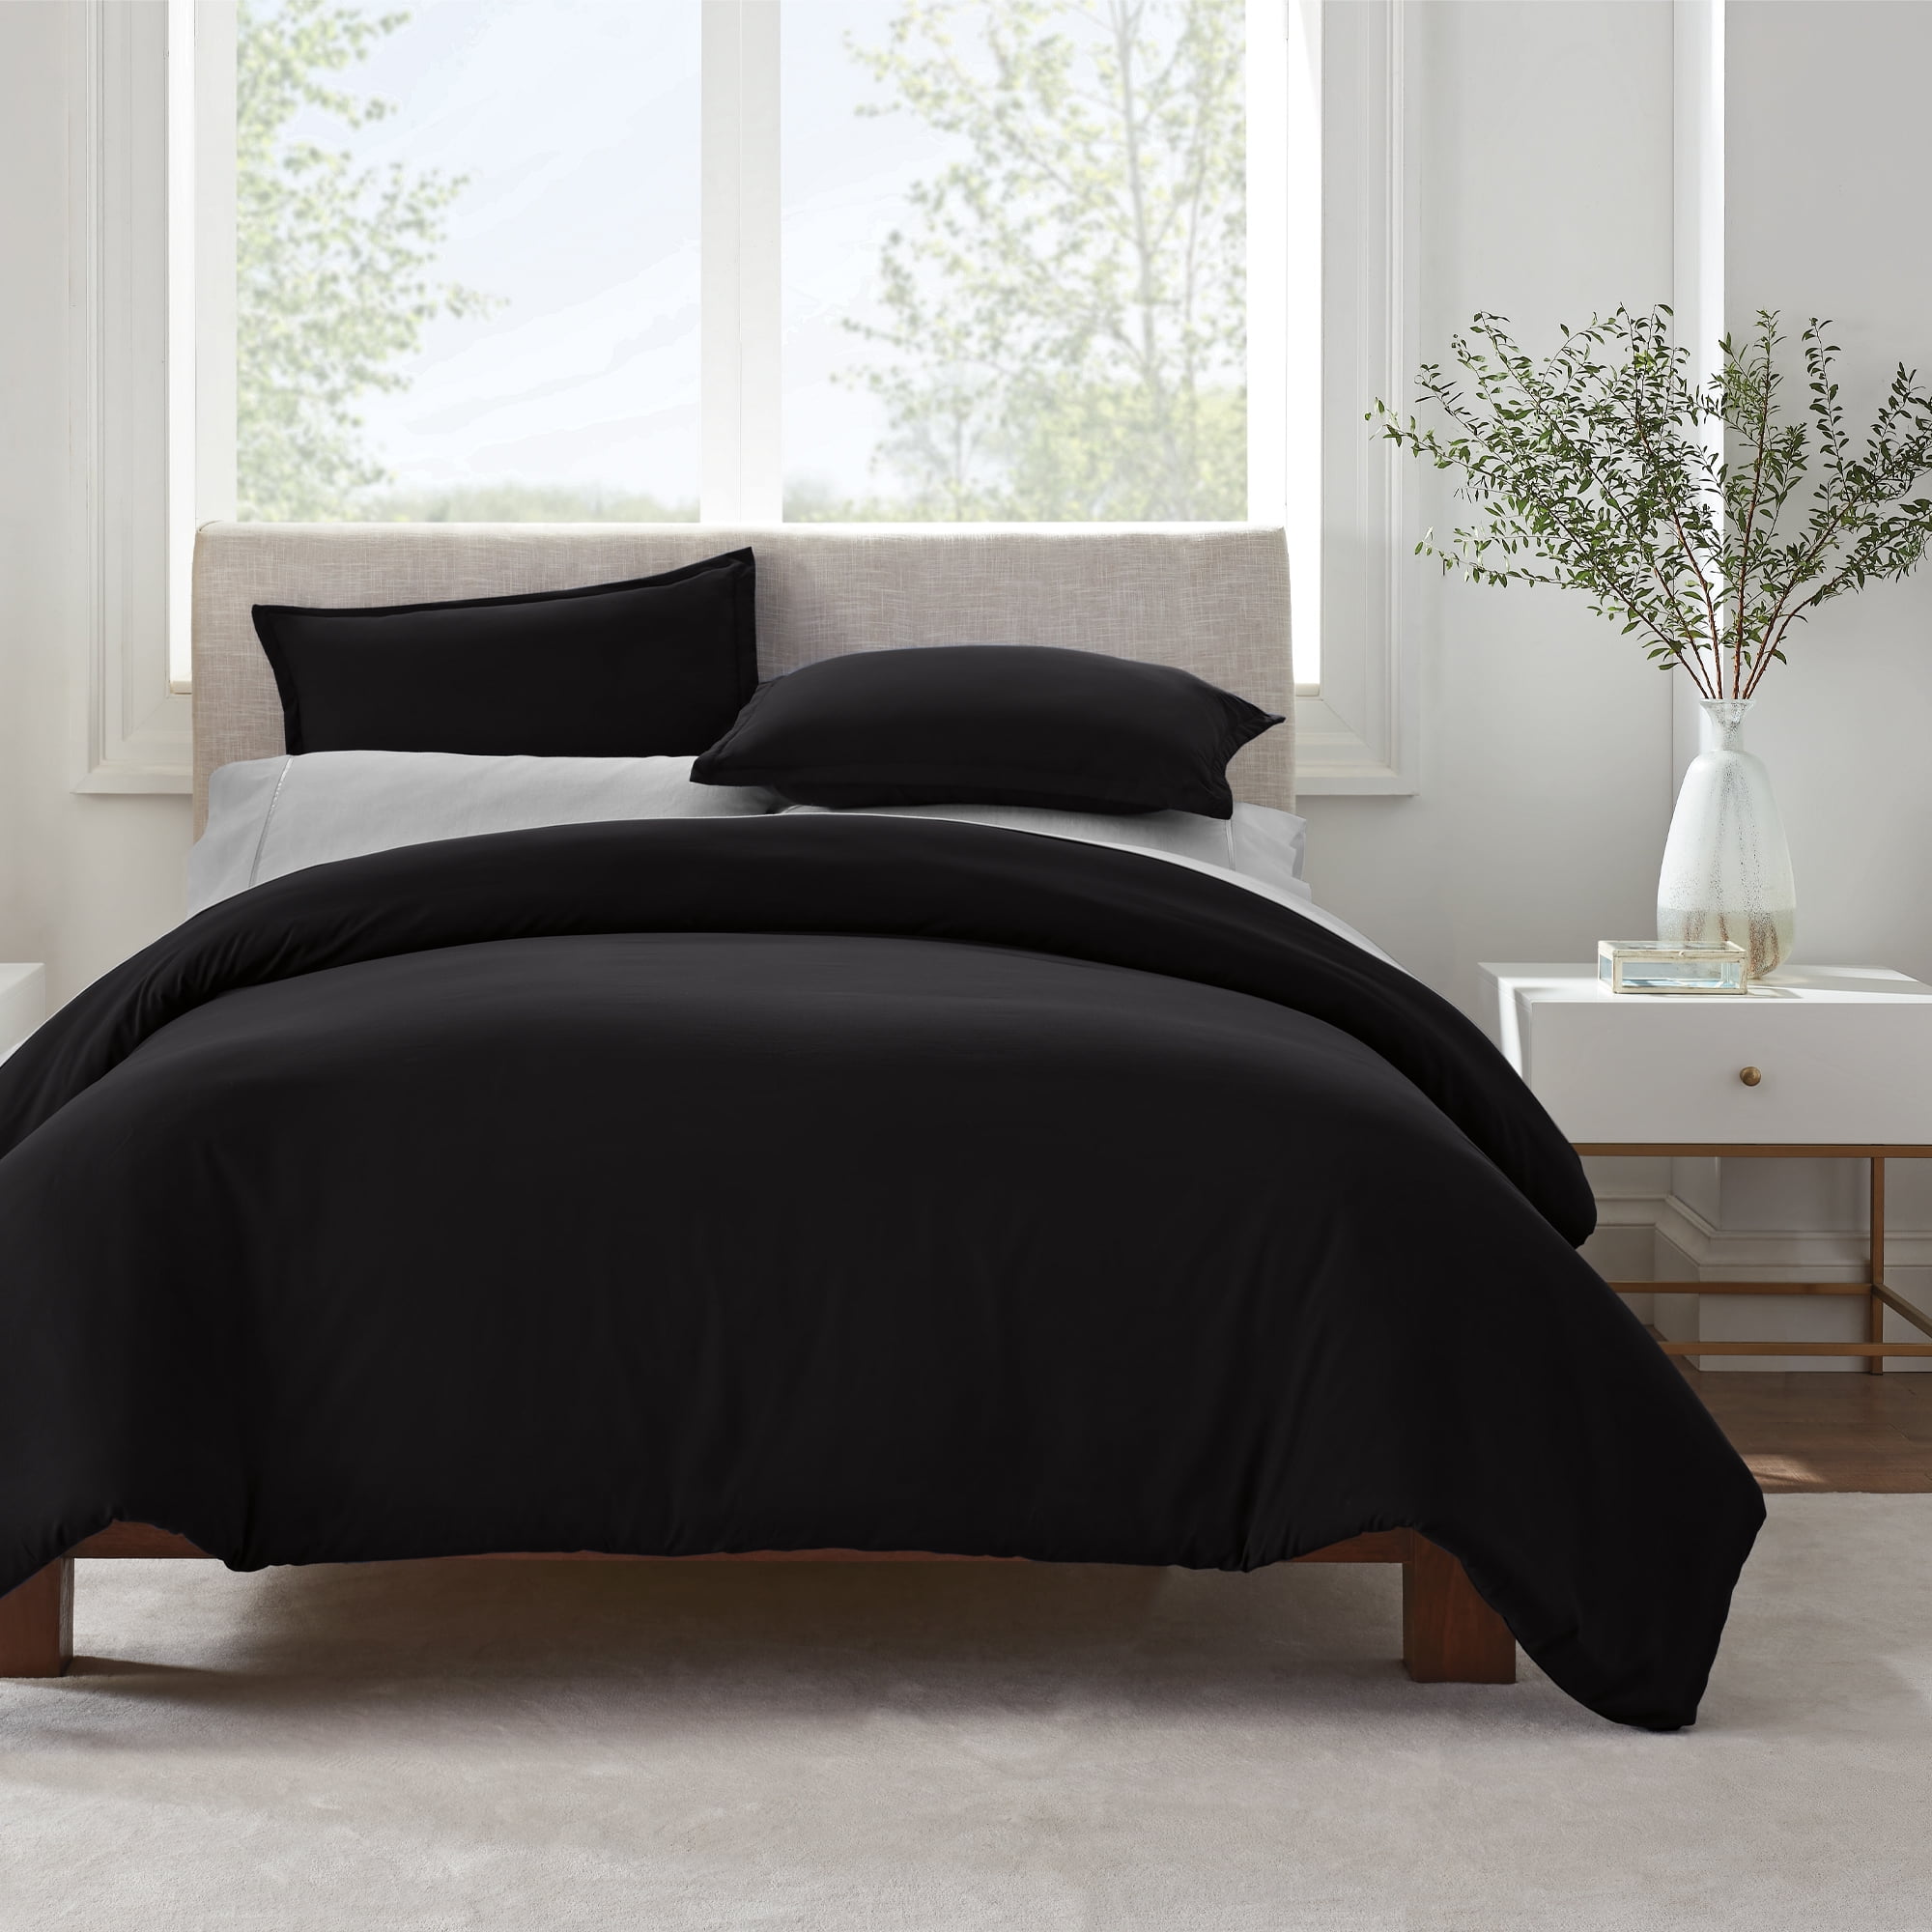 Twin XL Pure Black Fitted Sheet 3D Leather Duvet Bed Sets Simple Classic  Sheet Set with All-Round El…See more Twin XL Pure Black Fitted Sheet 3D